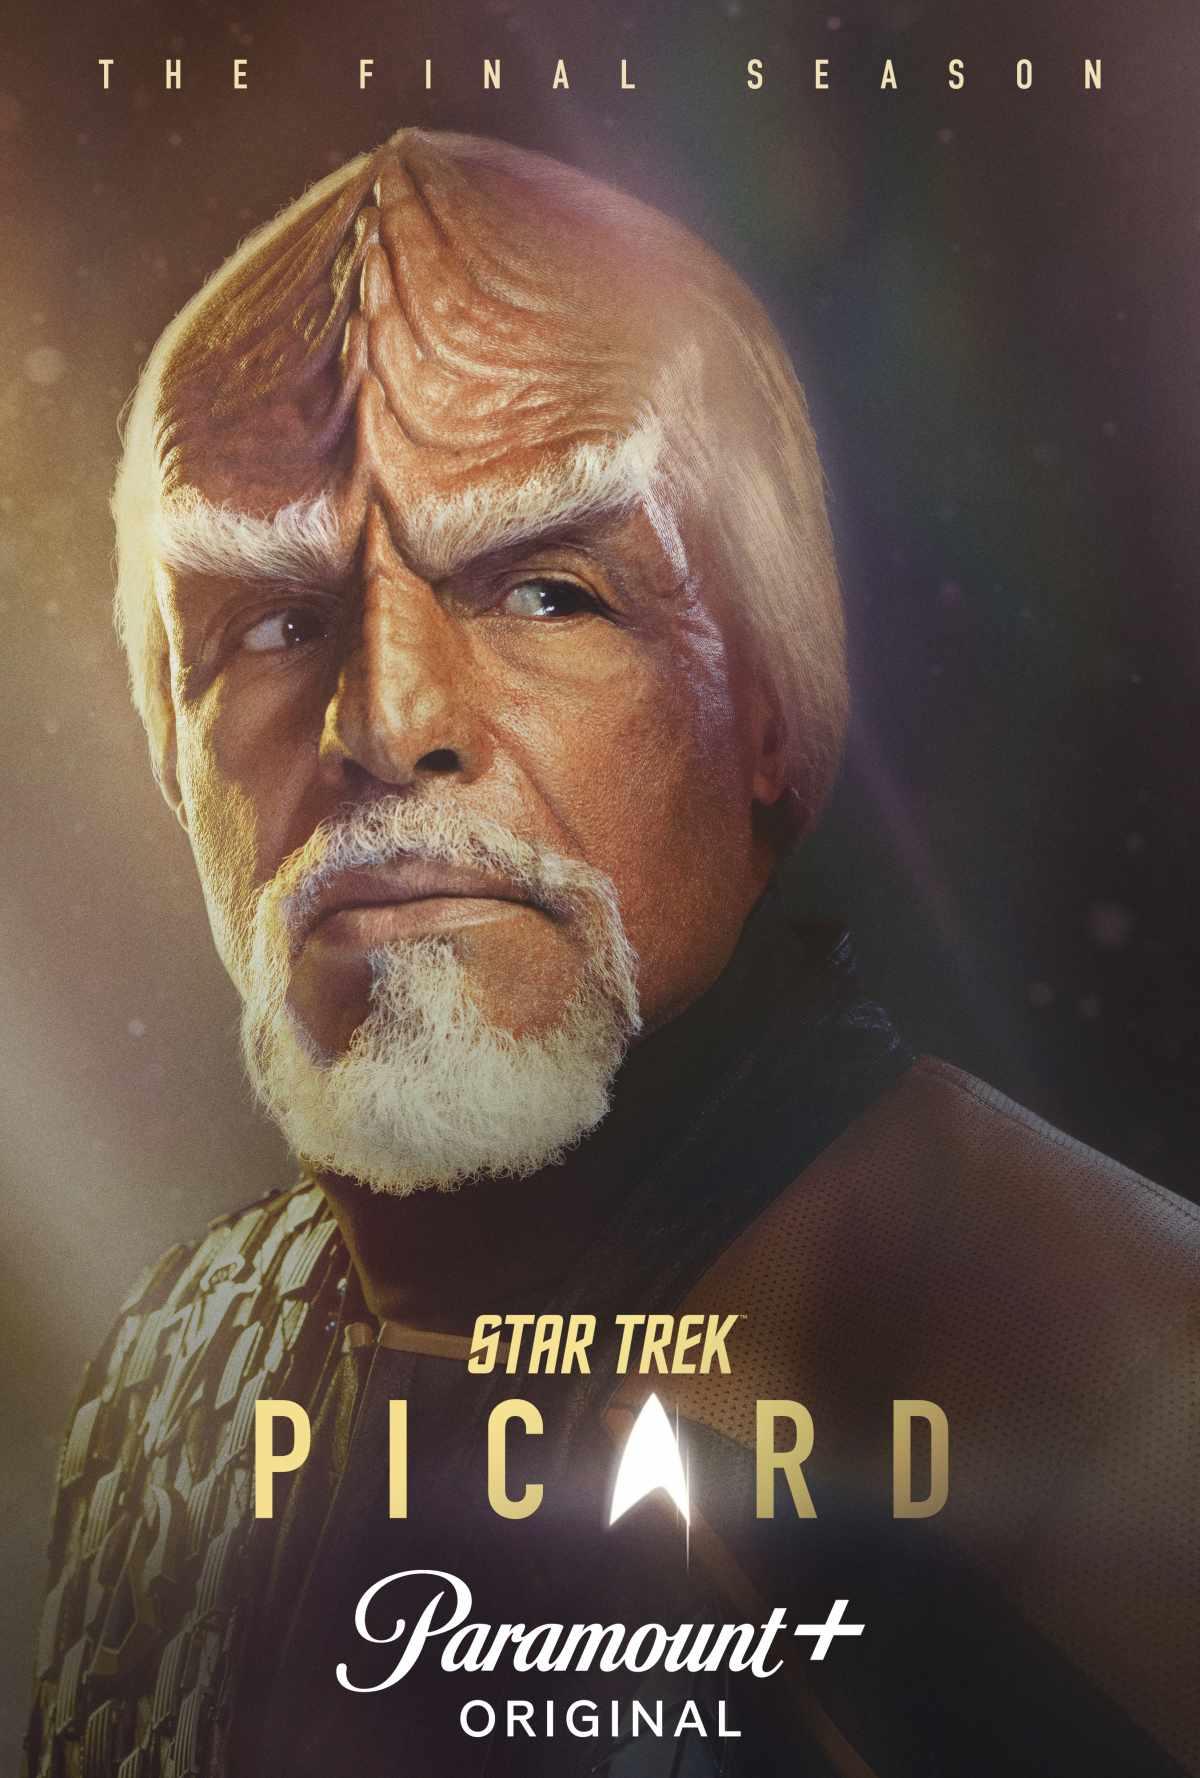 SDCC 2022: First Look Character Posters for Star Trek: Picard